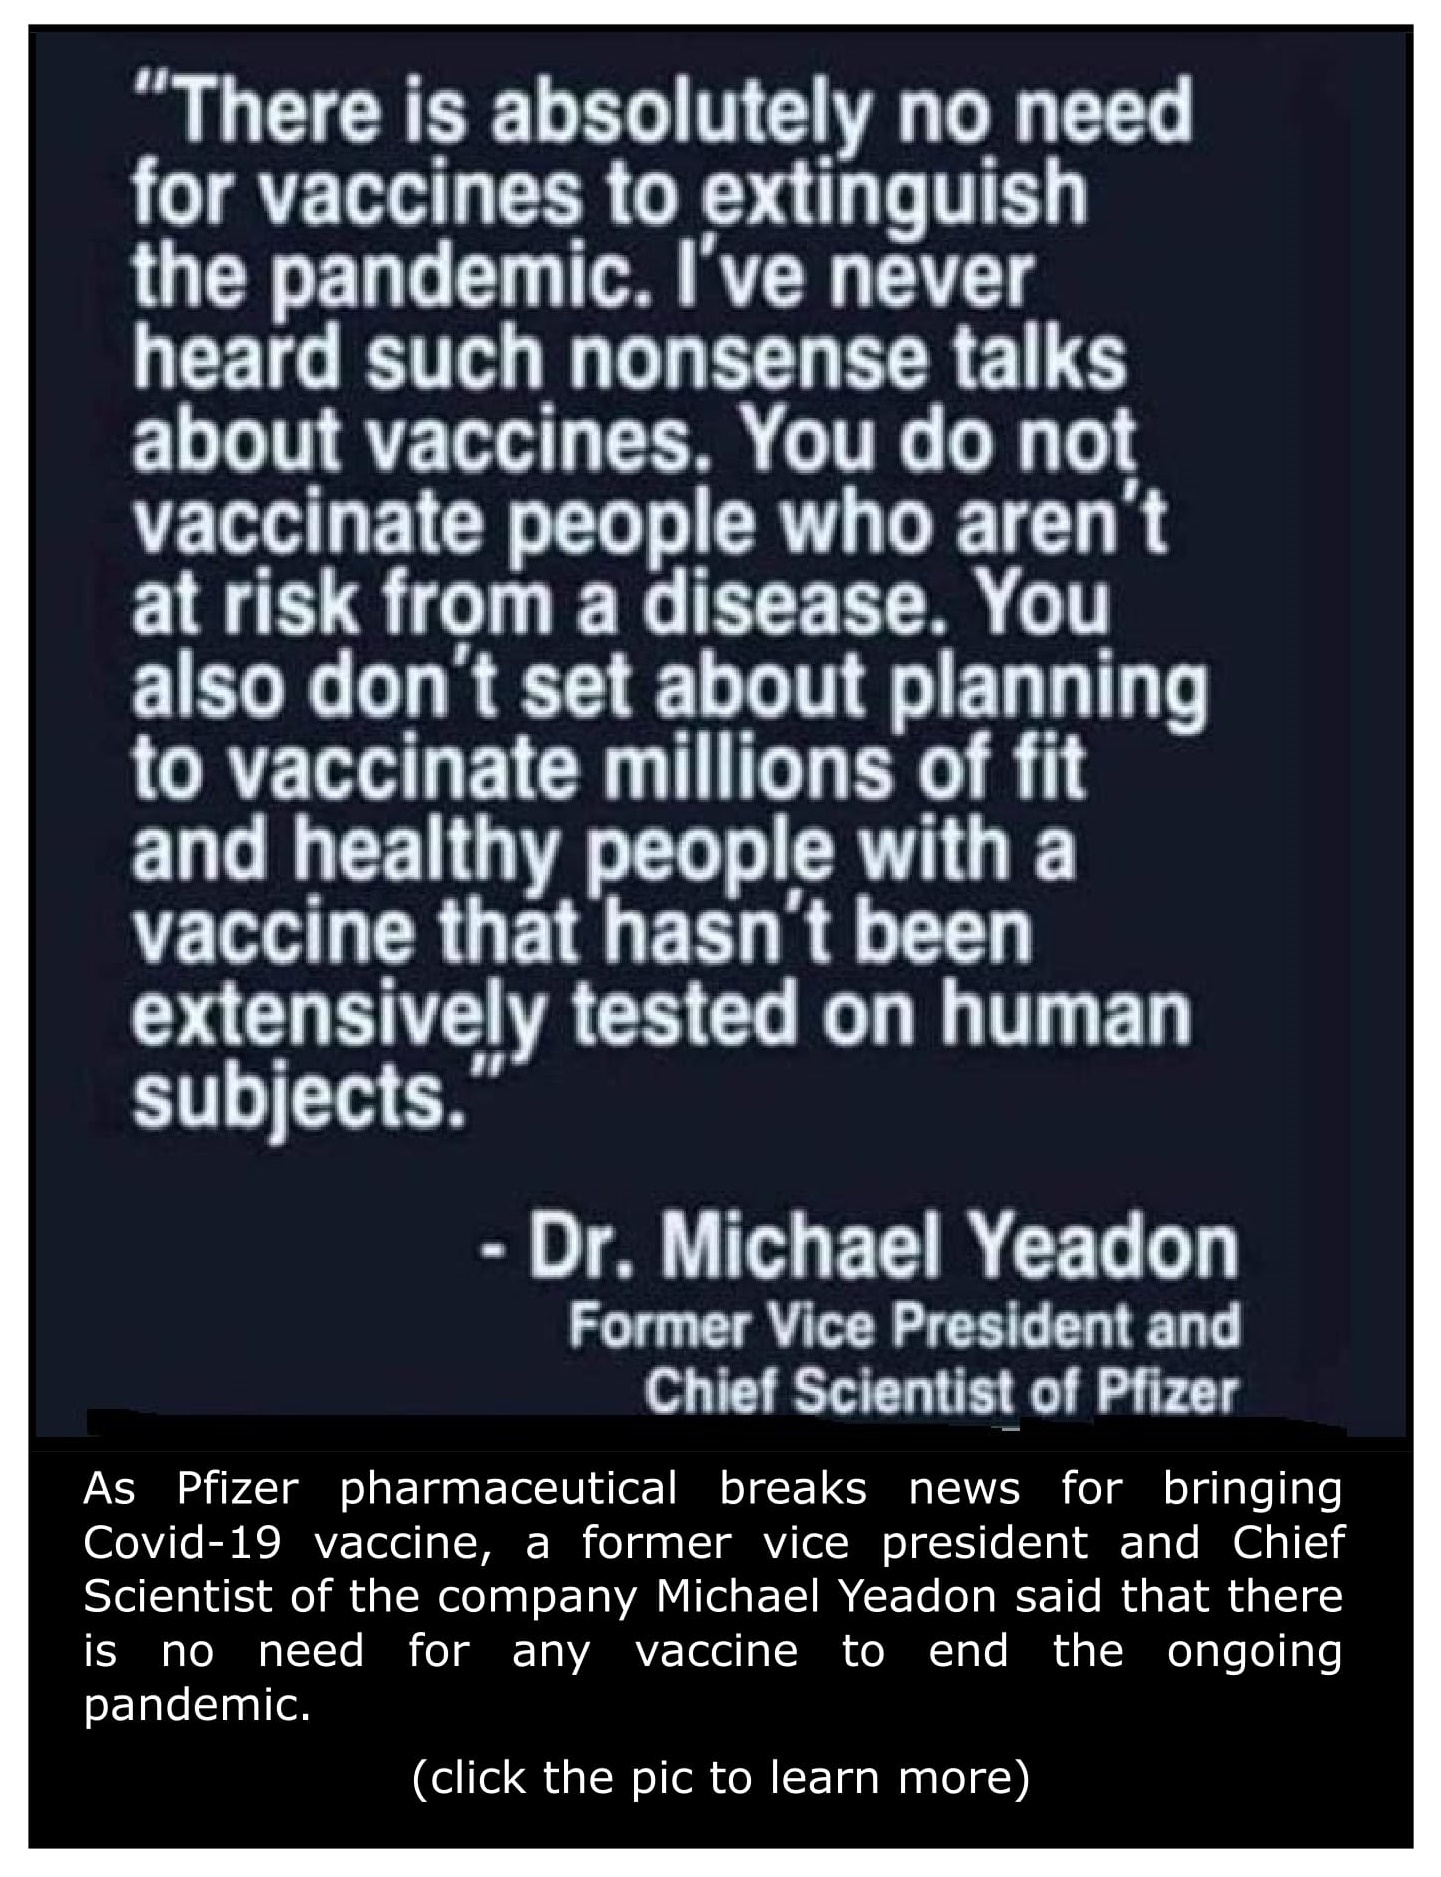 No Need for Vaccines